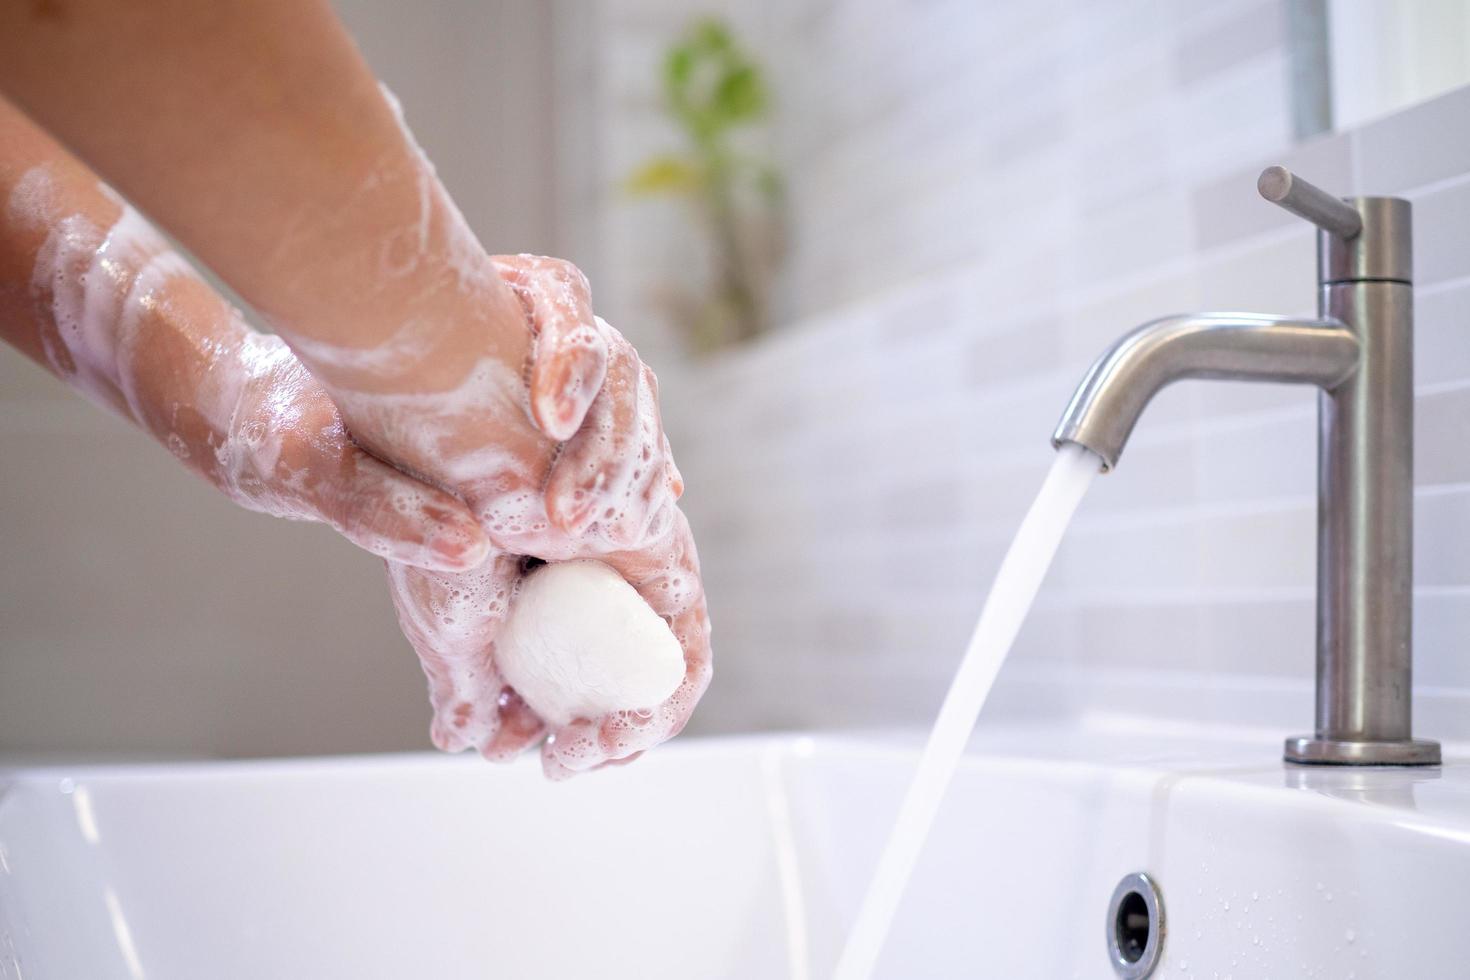 Women wash their hands with soap on the bathroom sinks. Frequent washing can help protect against covid-19 viruses. photo